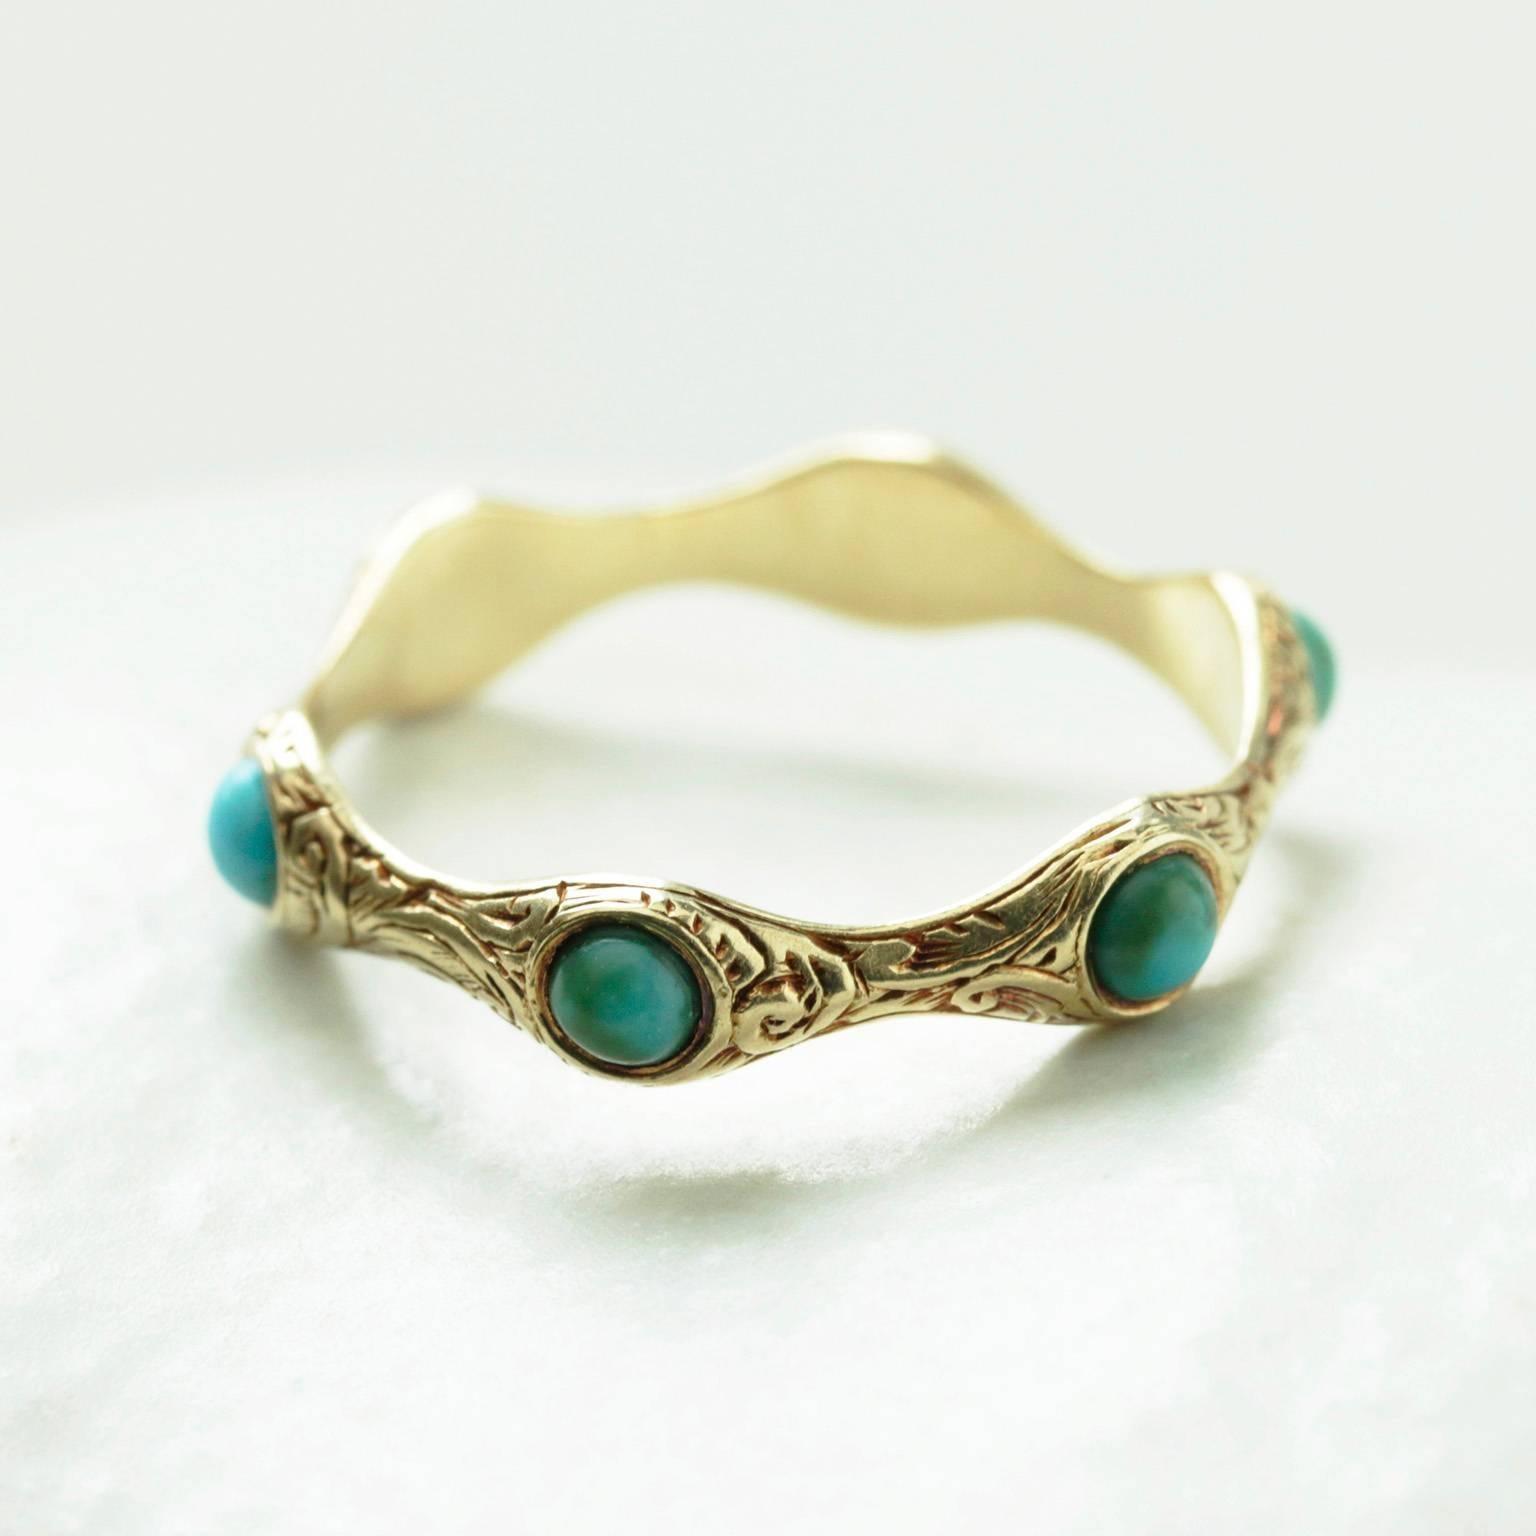 A rare and unusual Georgian turquoise eternity ring. The distinctive wavy shank is elaborately engraved. The ring is 15k yellow gold. Some color disparity in turquoise cabochons is natural. The ring is in very good condition.

US Size: 5 1/2 (not